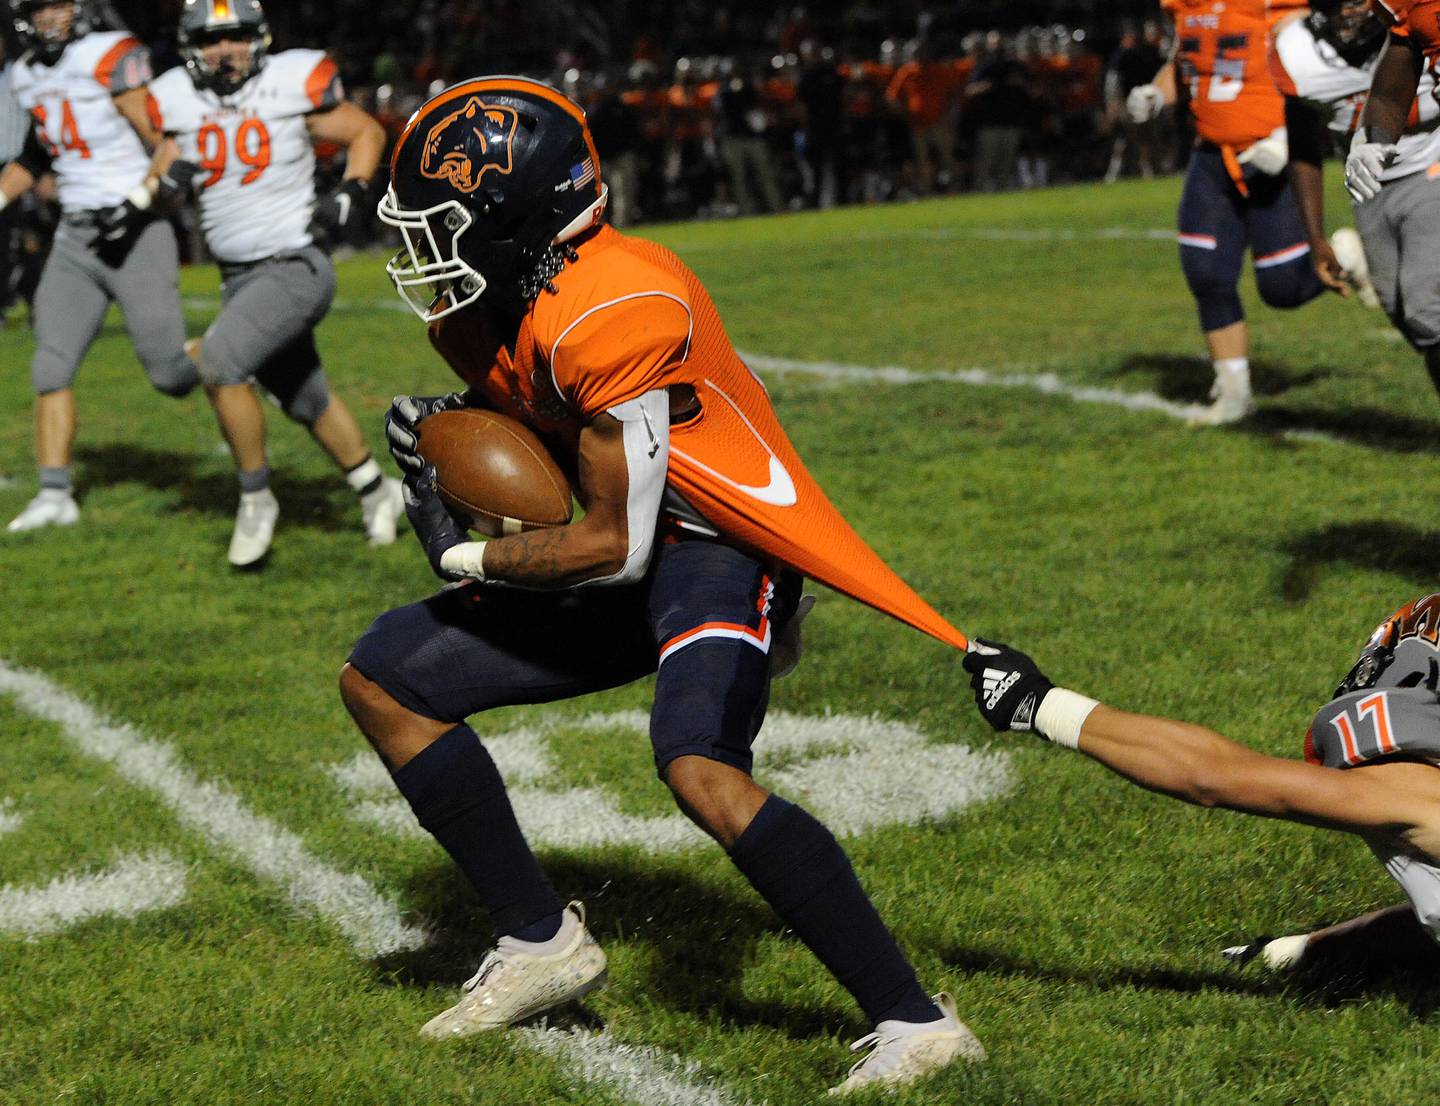 Oswego runningback Mark Melton breaks away from the jersey tug of Minooka defensive back Chase Coleman (17) during a varsity football game at Oswego High School on Friday.